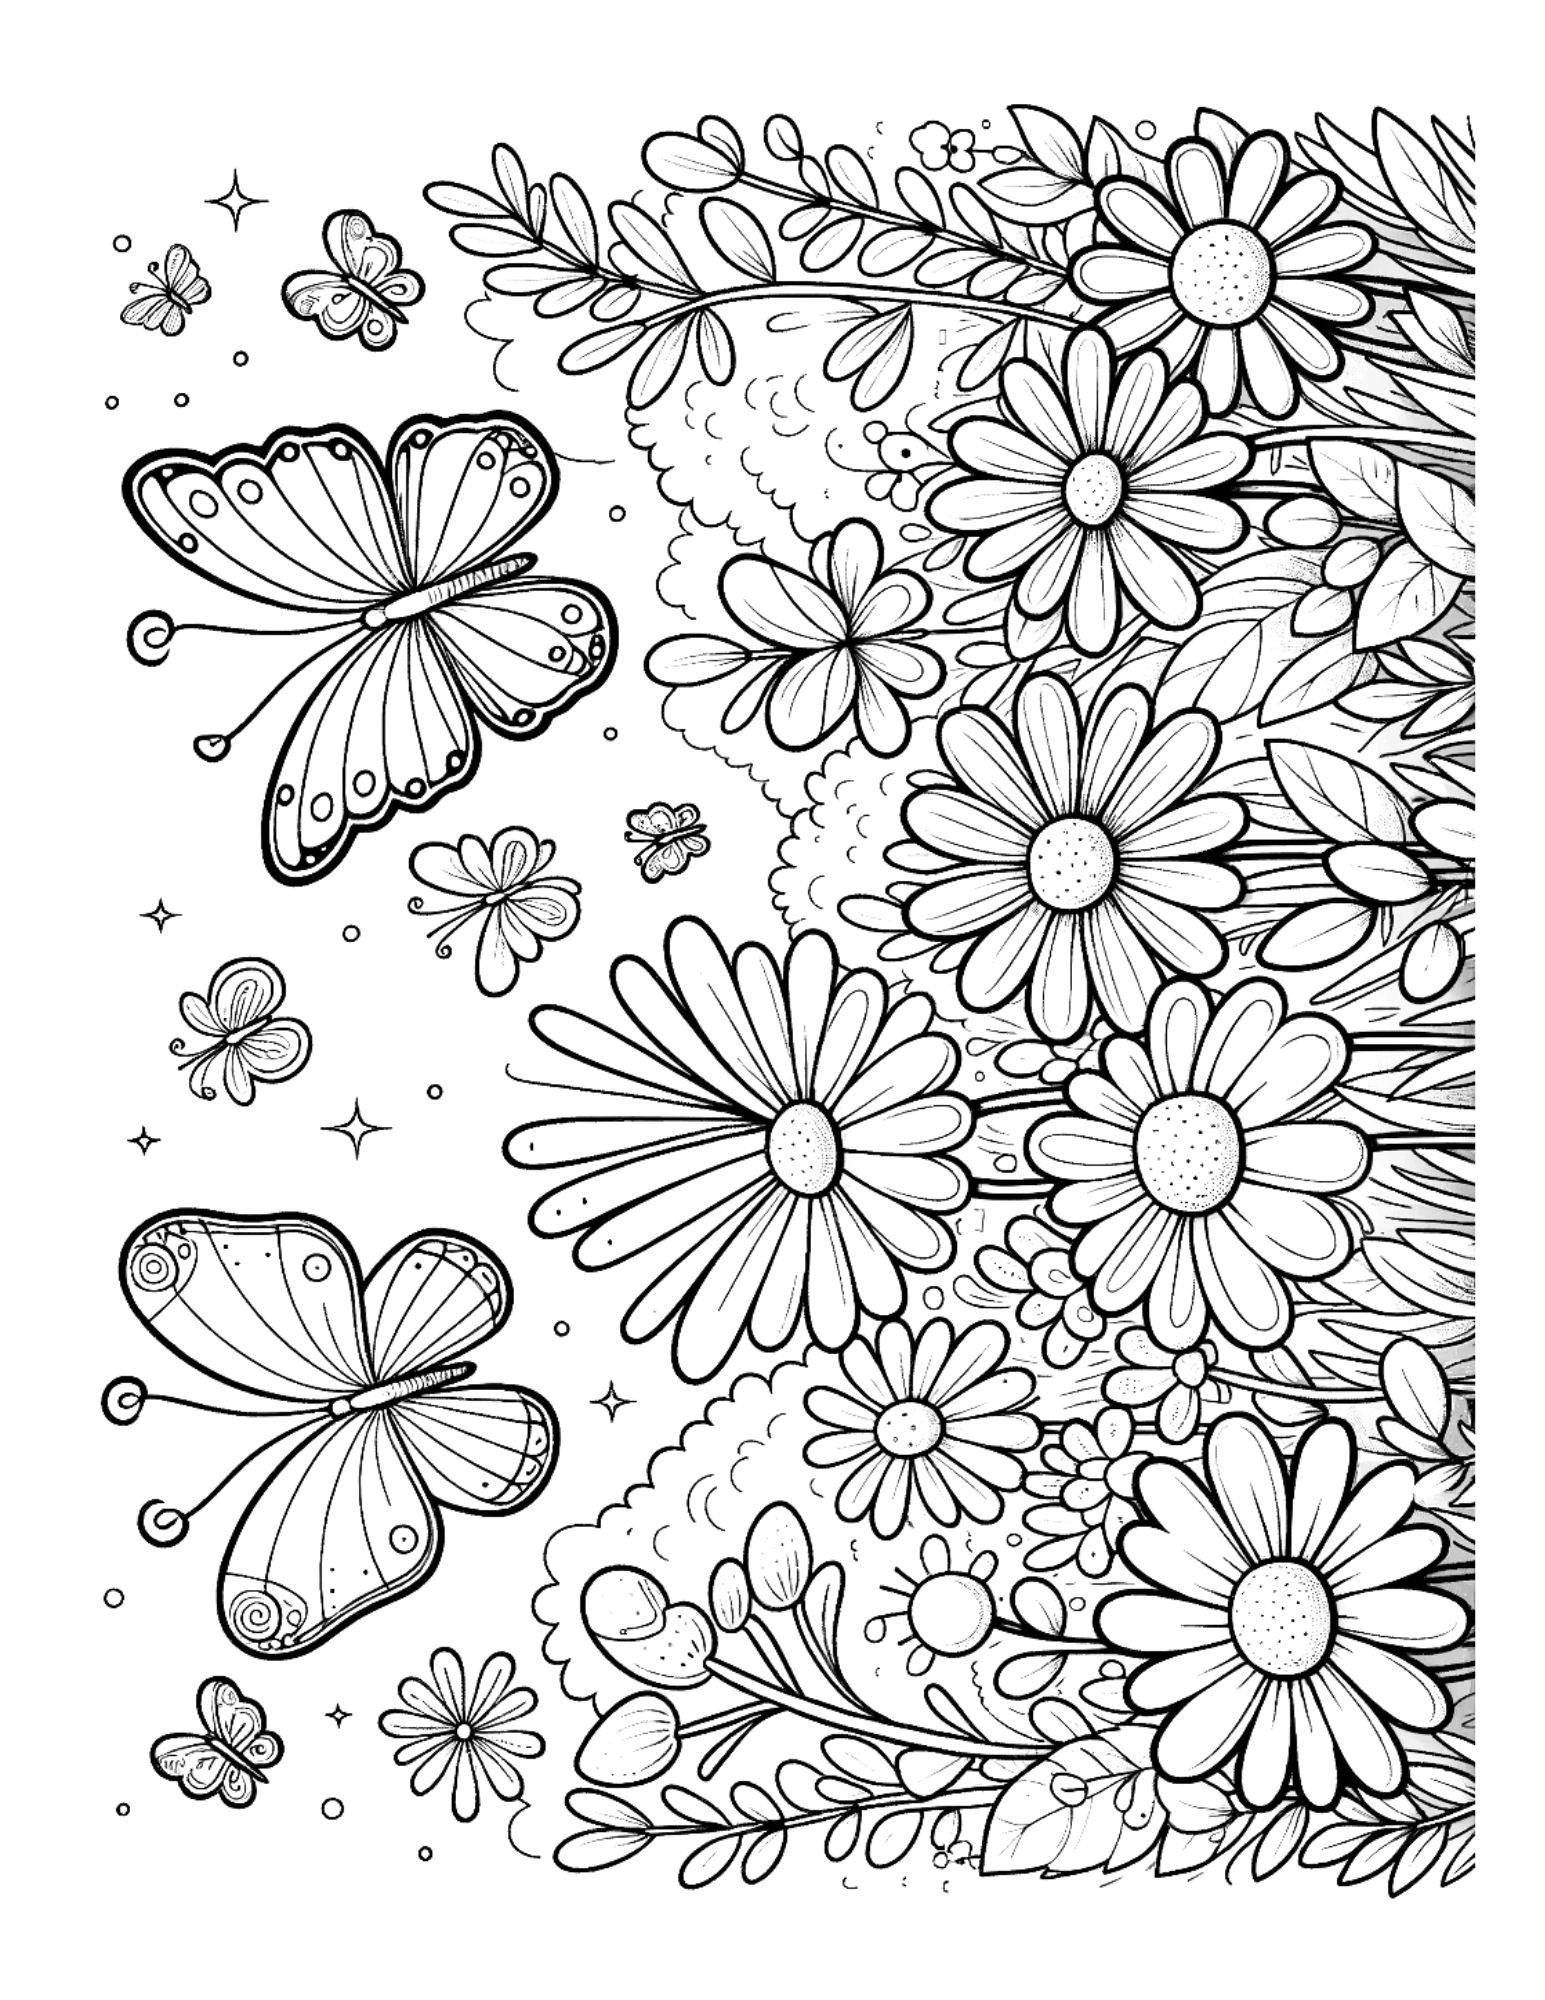 spring coloring page, PDF, instant download, kids